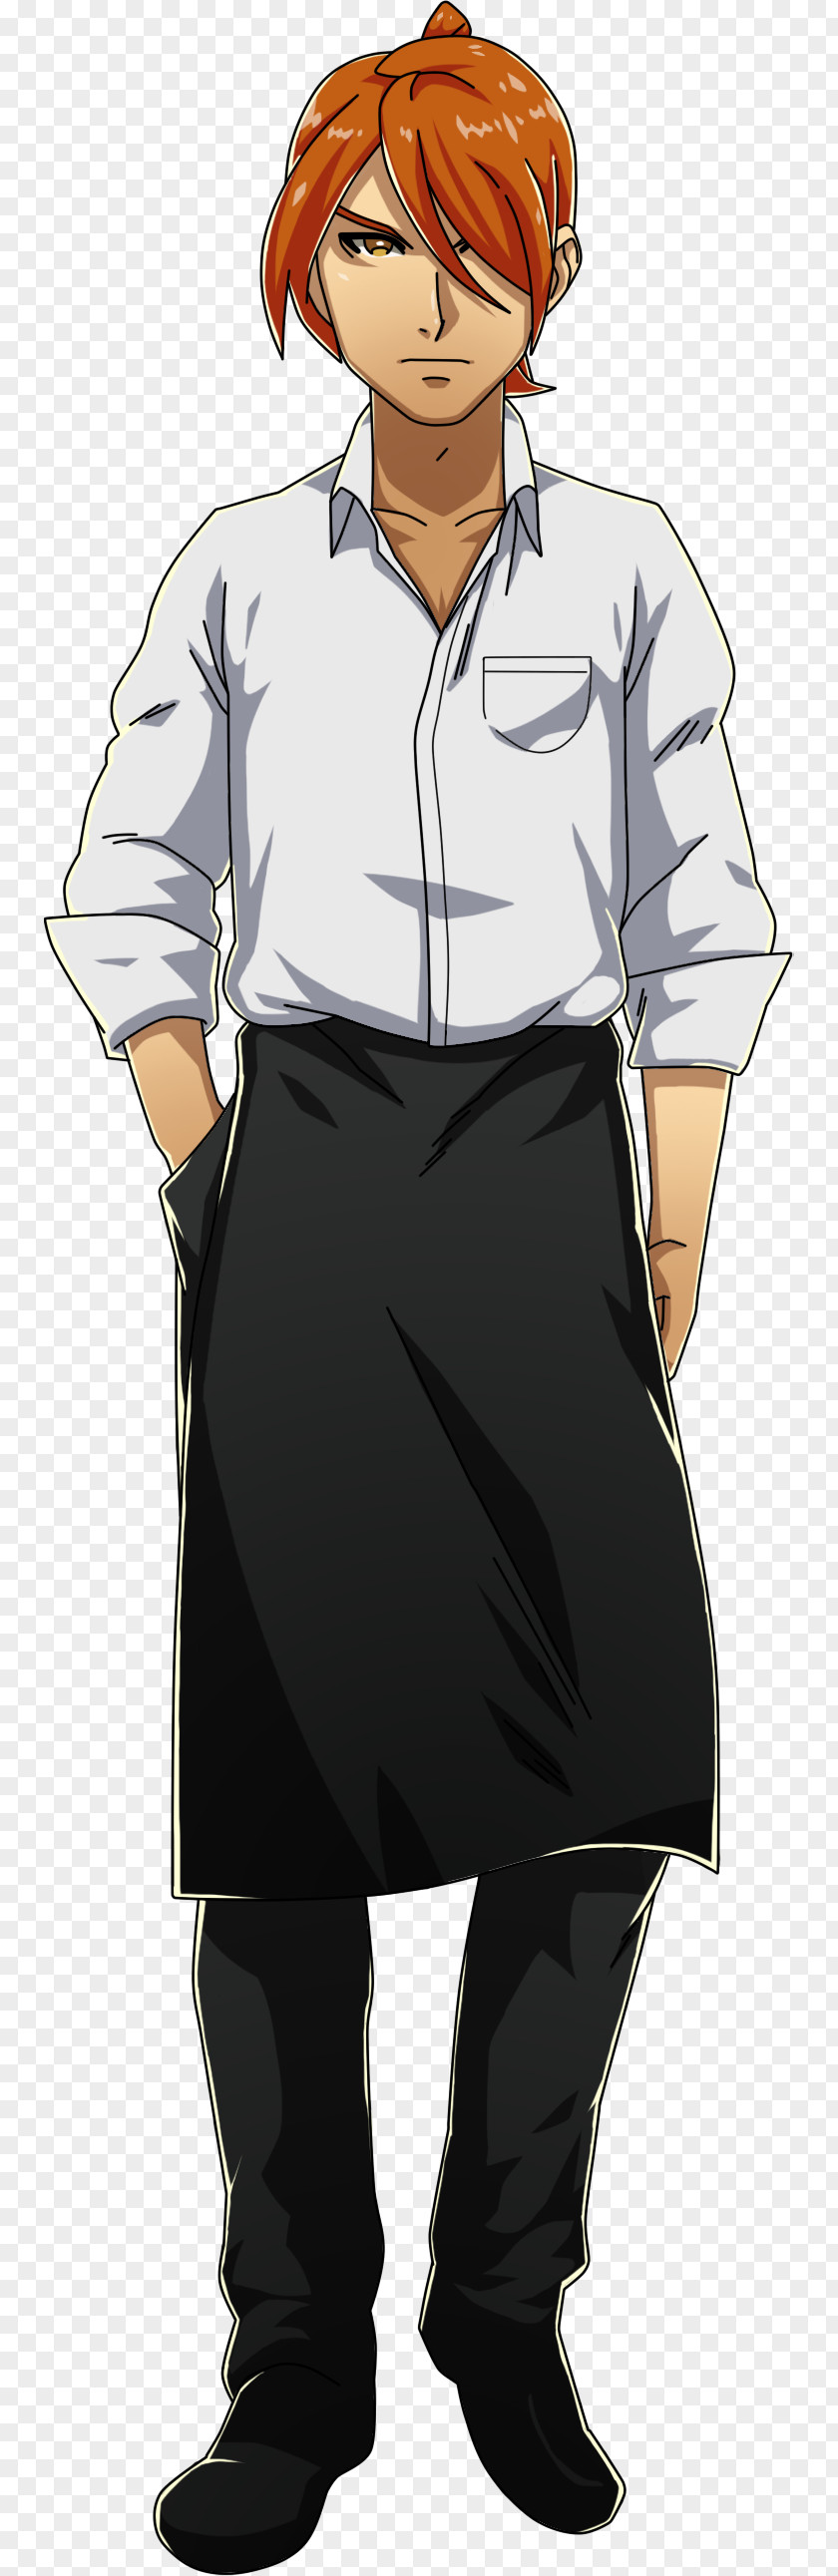 Worked As A Waiter The Bachelor Character Bachelor's Degree Boy PNG